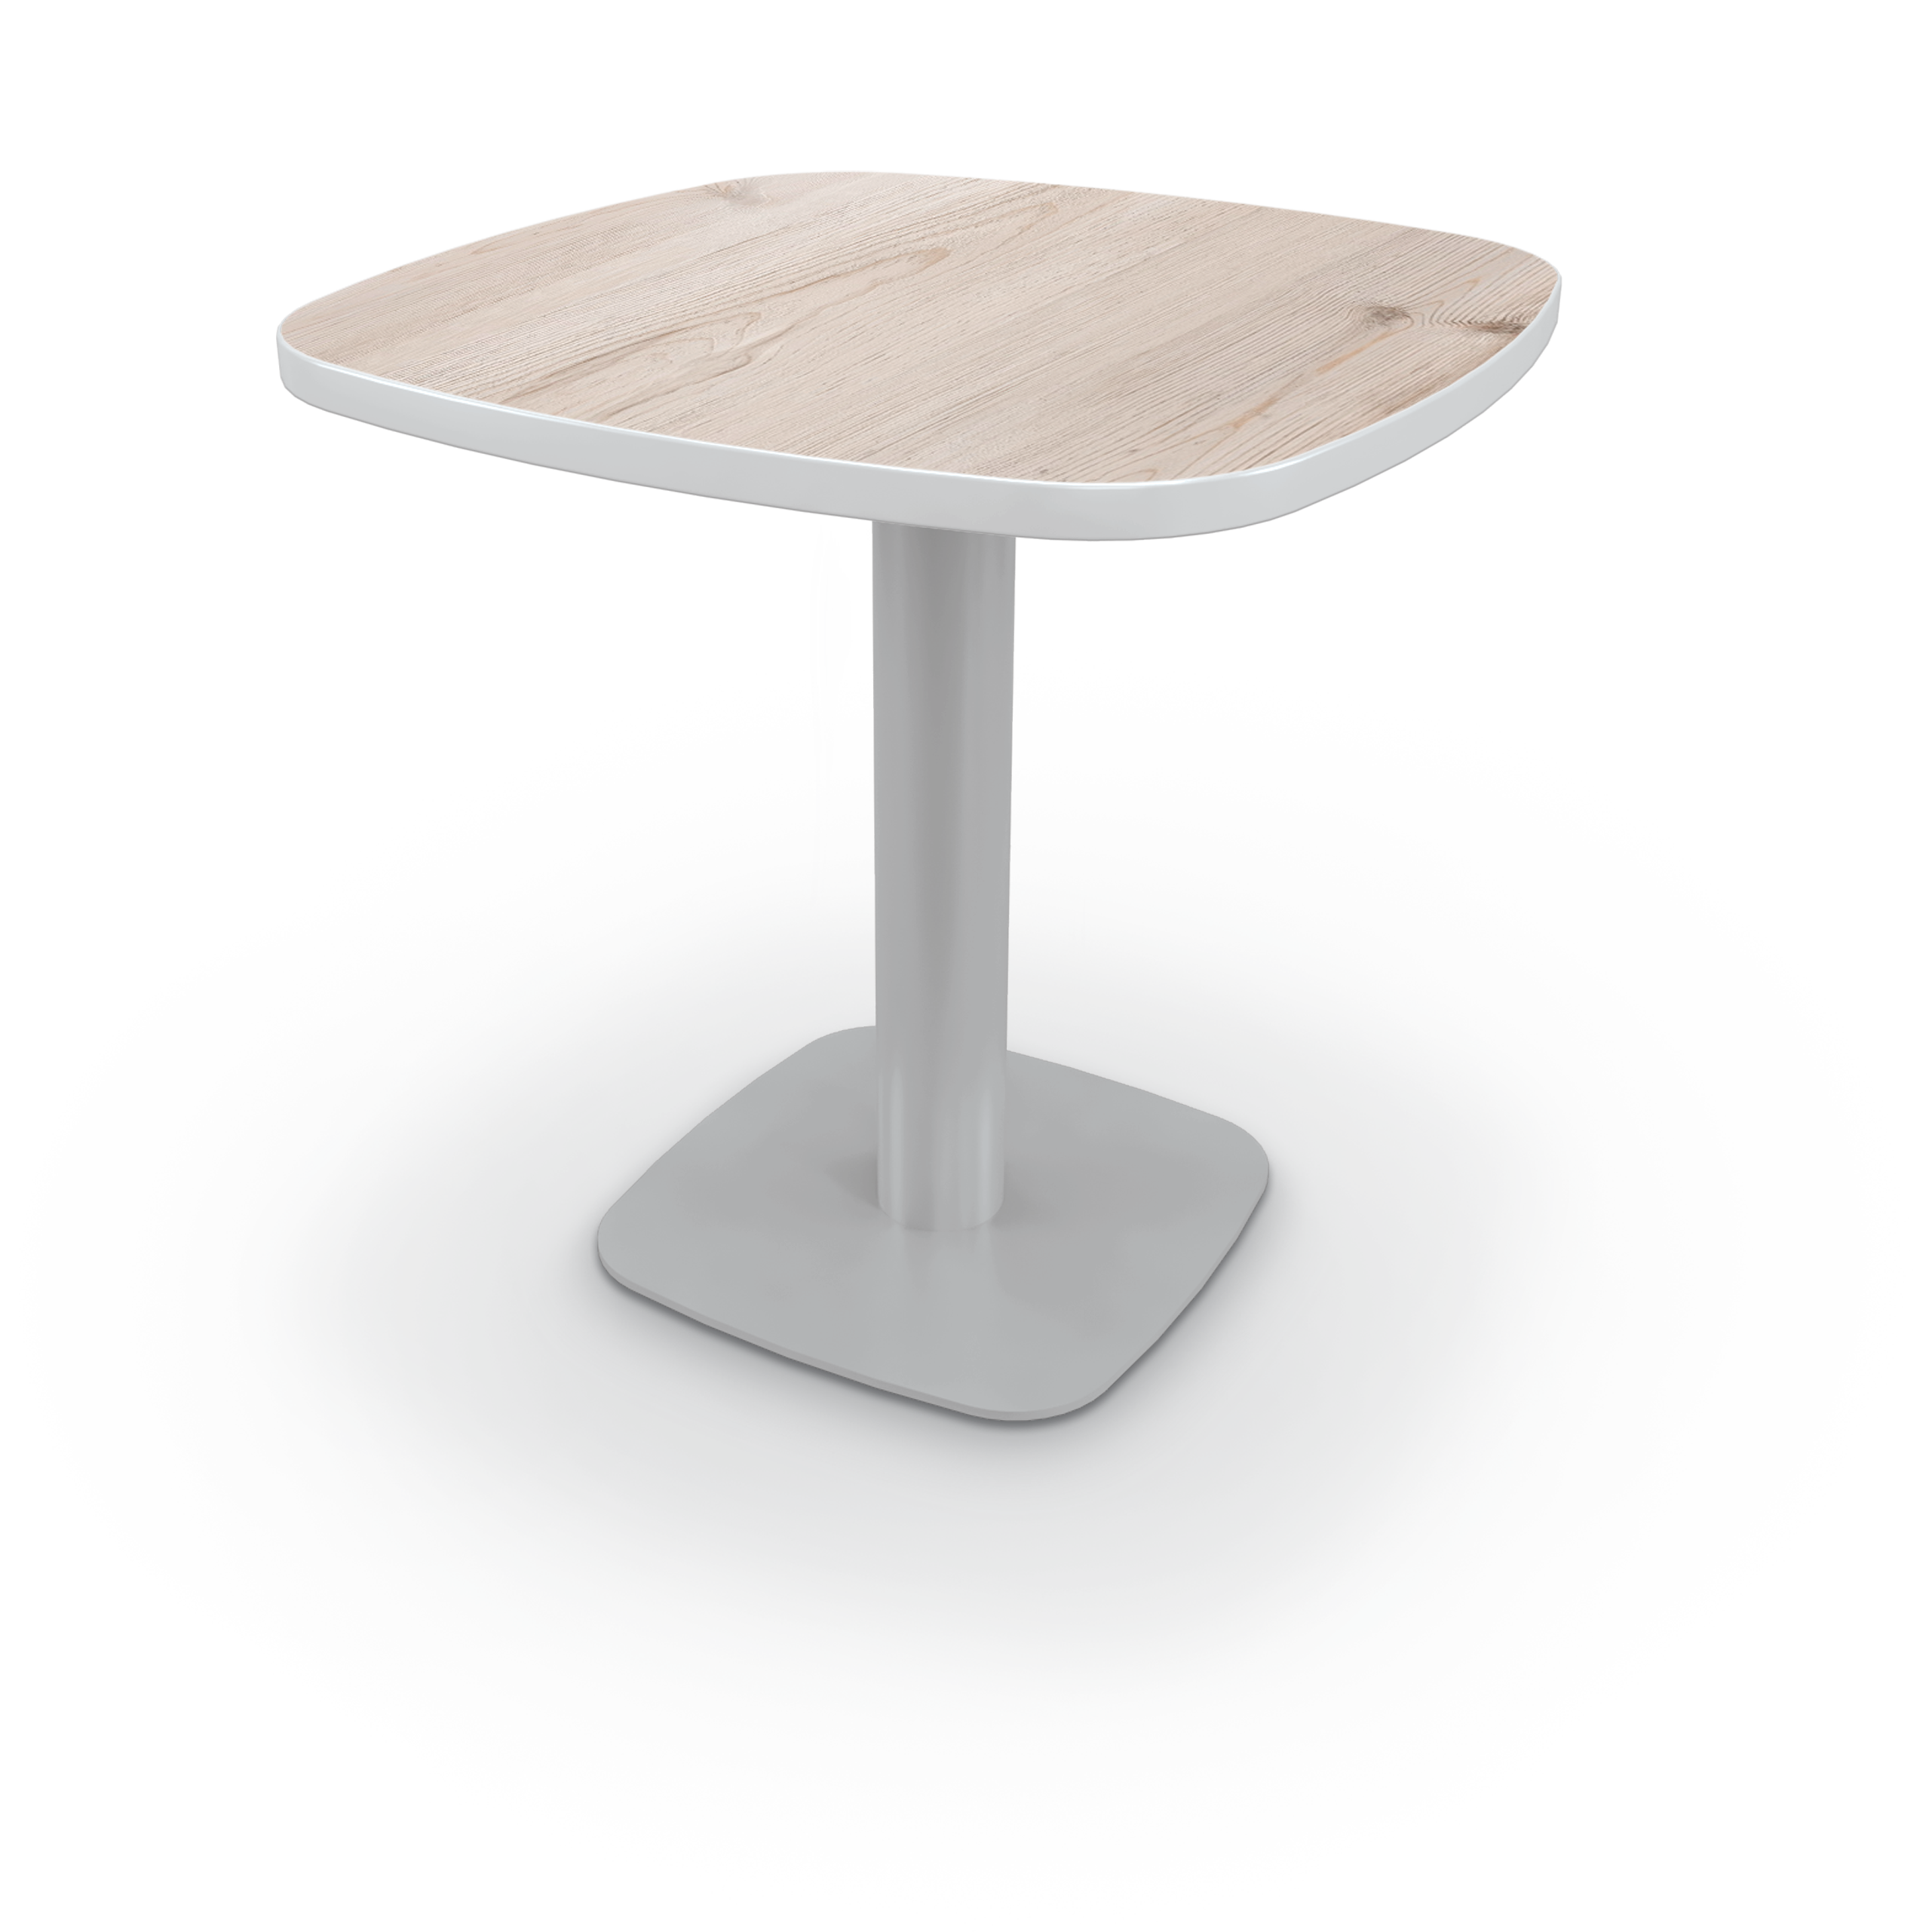 Inklud bistro table